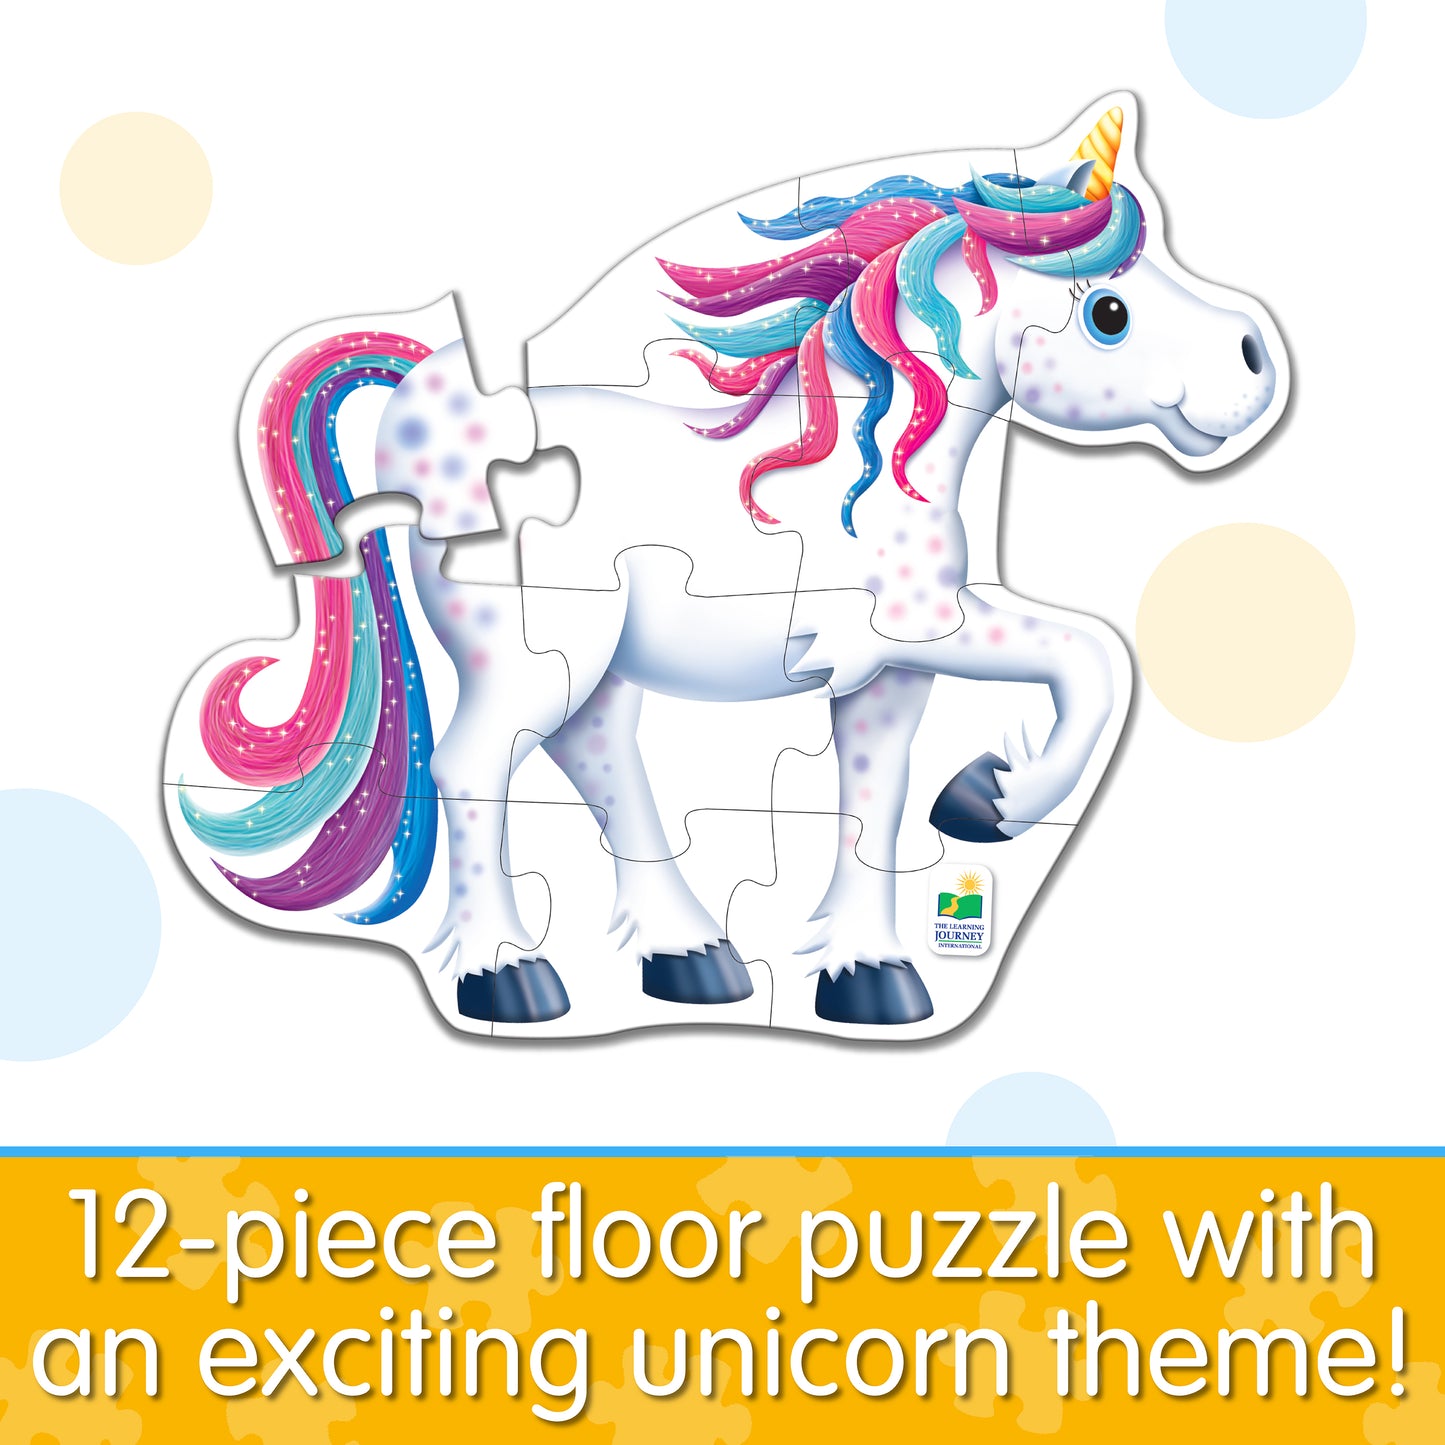 Infographic about My First Big Puzzle - Unicorn that says, "12-piece floor puzzle with an exciting unicorn theme!"